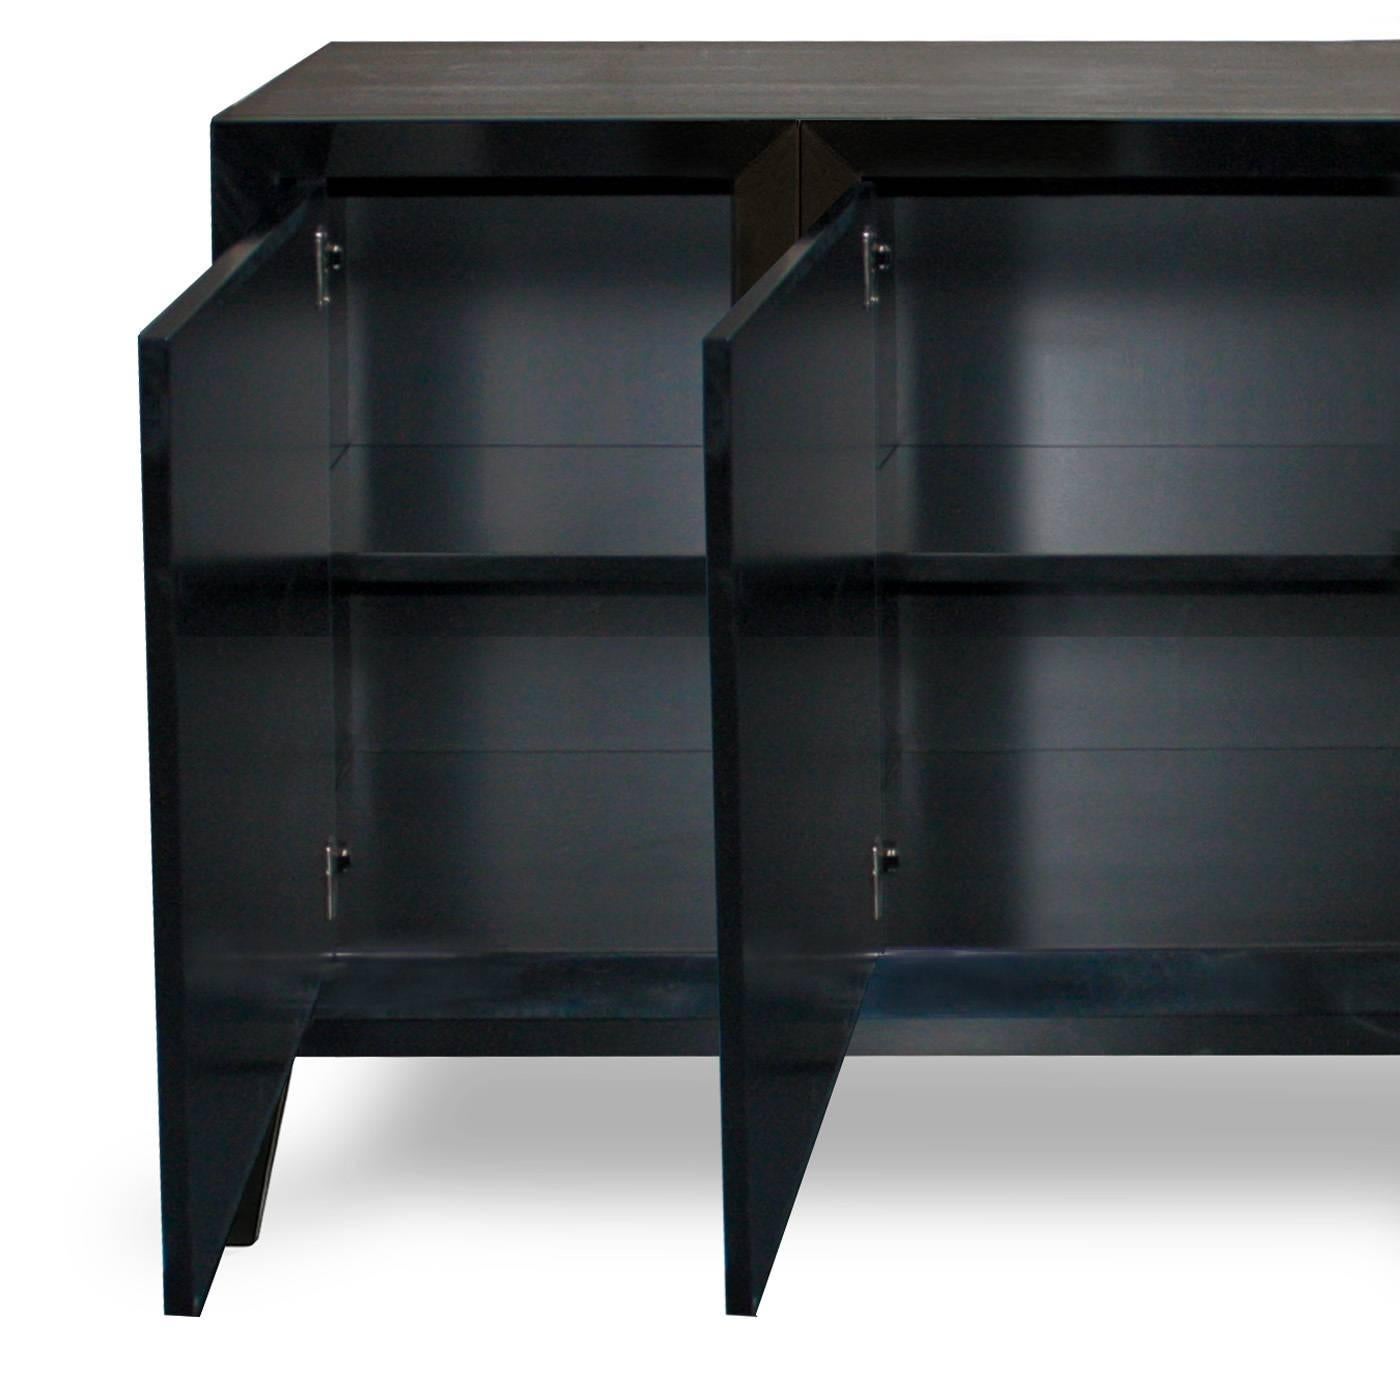 This four-door sideboard is beautifully crafted by the finest Italian artisans and is finished in a hard, super sleek black gloss lacquer. The wooden handle in the shape of half-spheres adds subtle glamour.